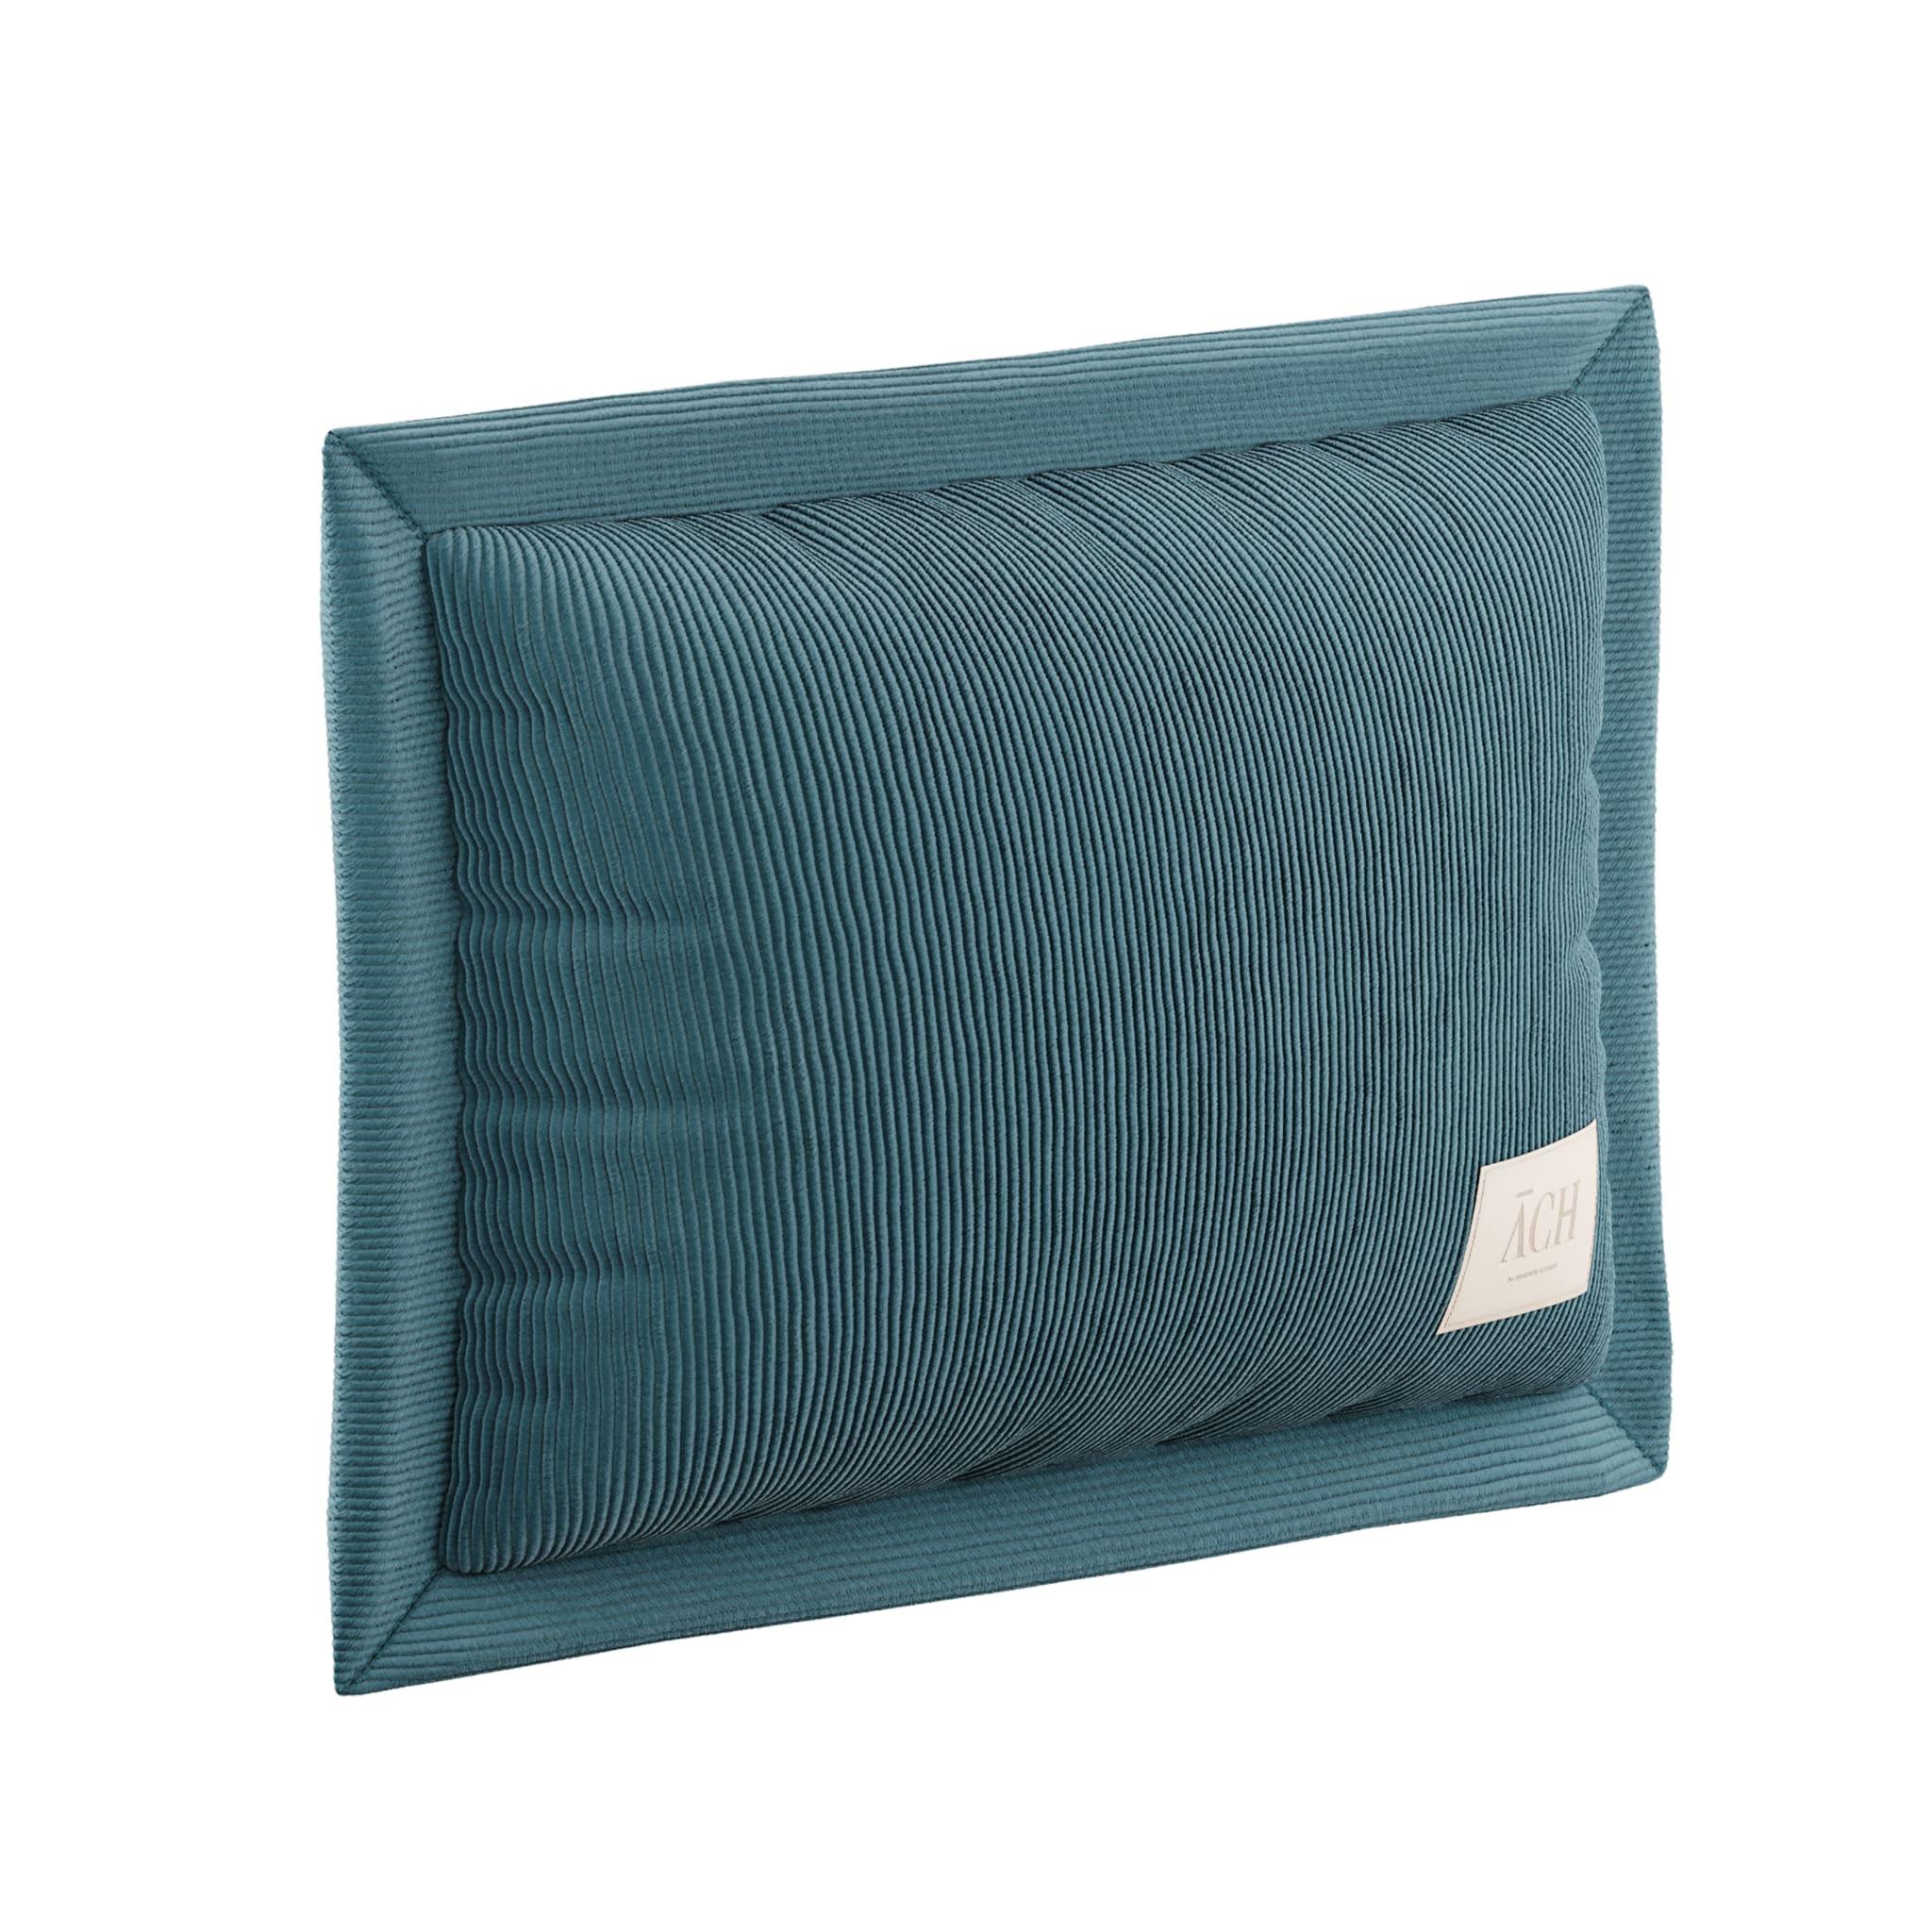 Decorative Throw Pillow Navy Corduroy, Modern Blue Velvet Lumbar Cushion 
Navy is a blue corduroy pillow with a rectangular shape and a sophisticated flange. The warm and delicate texture of Corduroy Navy Rectangle modern flange pillow will make you